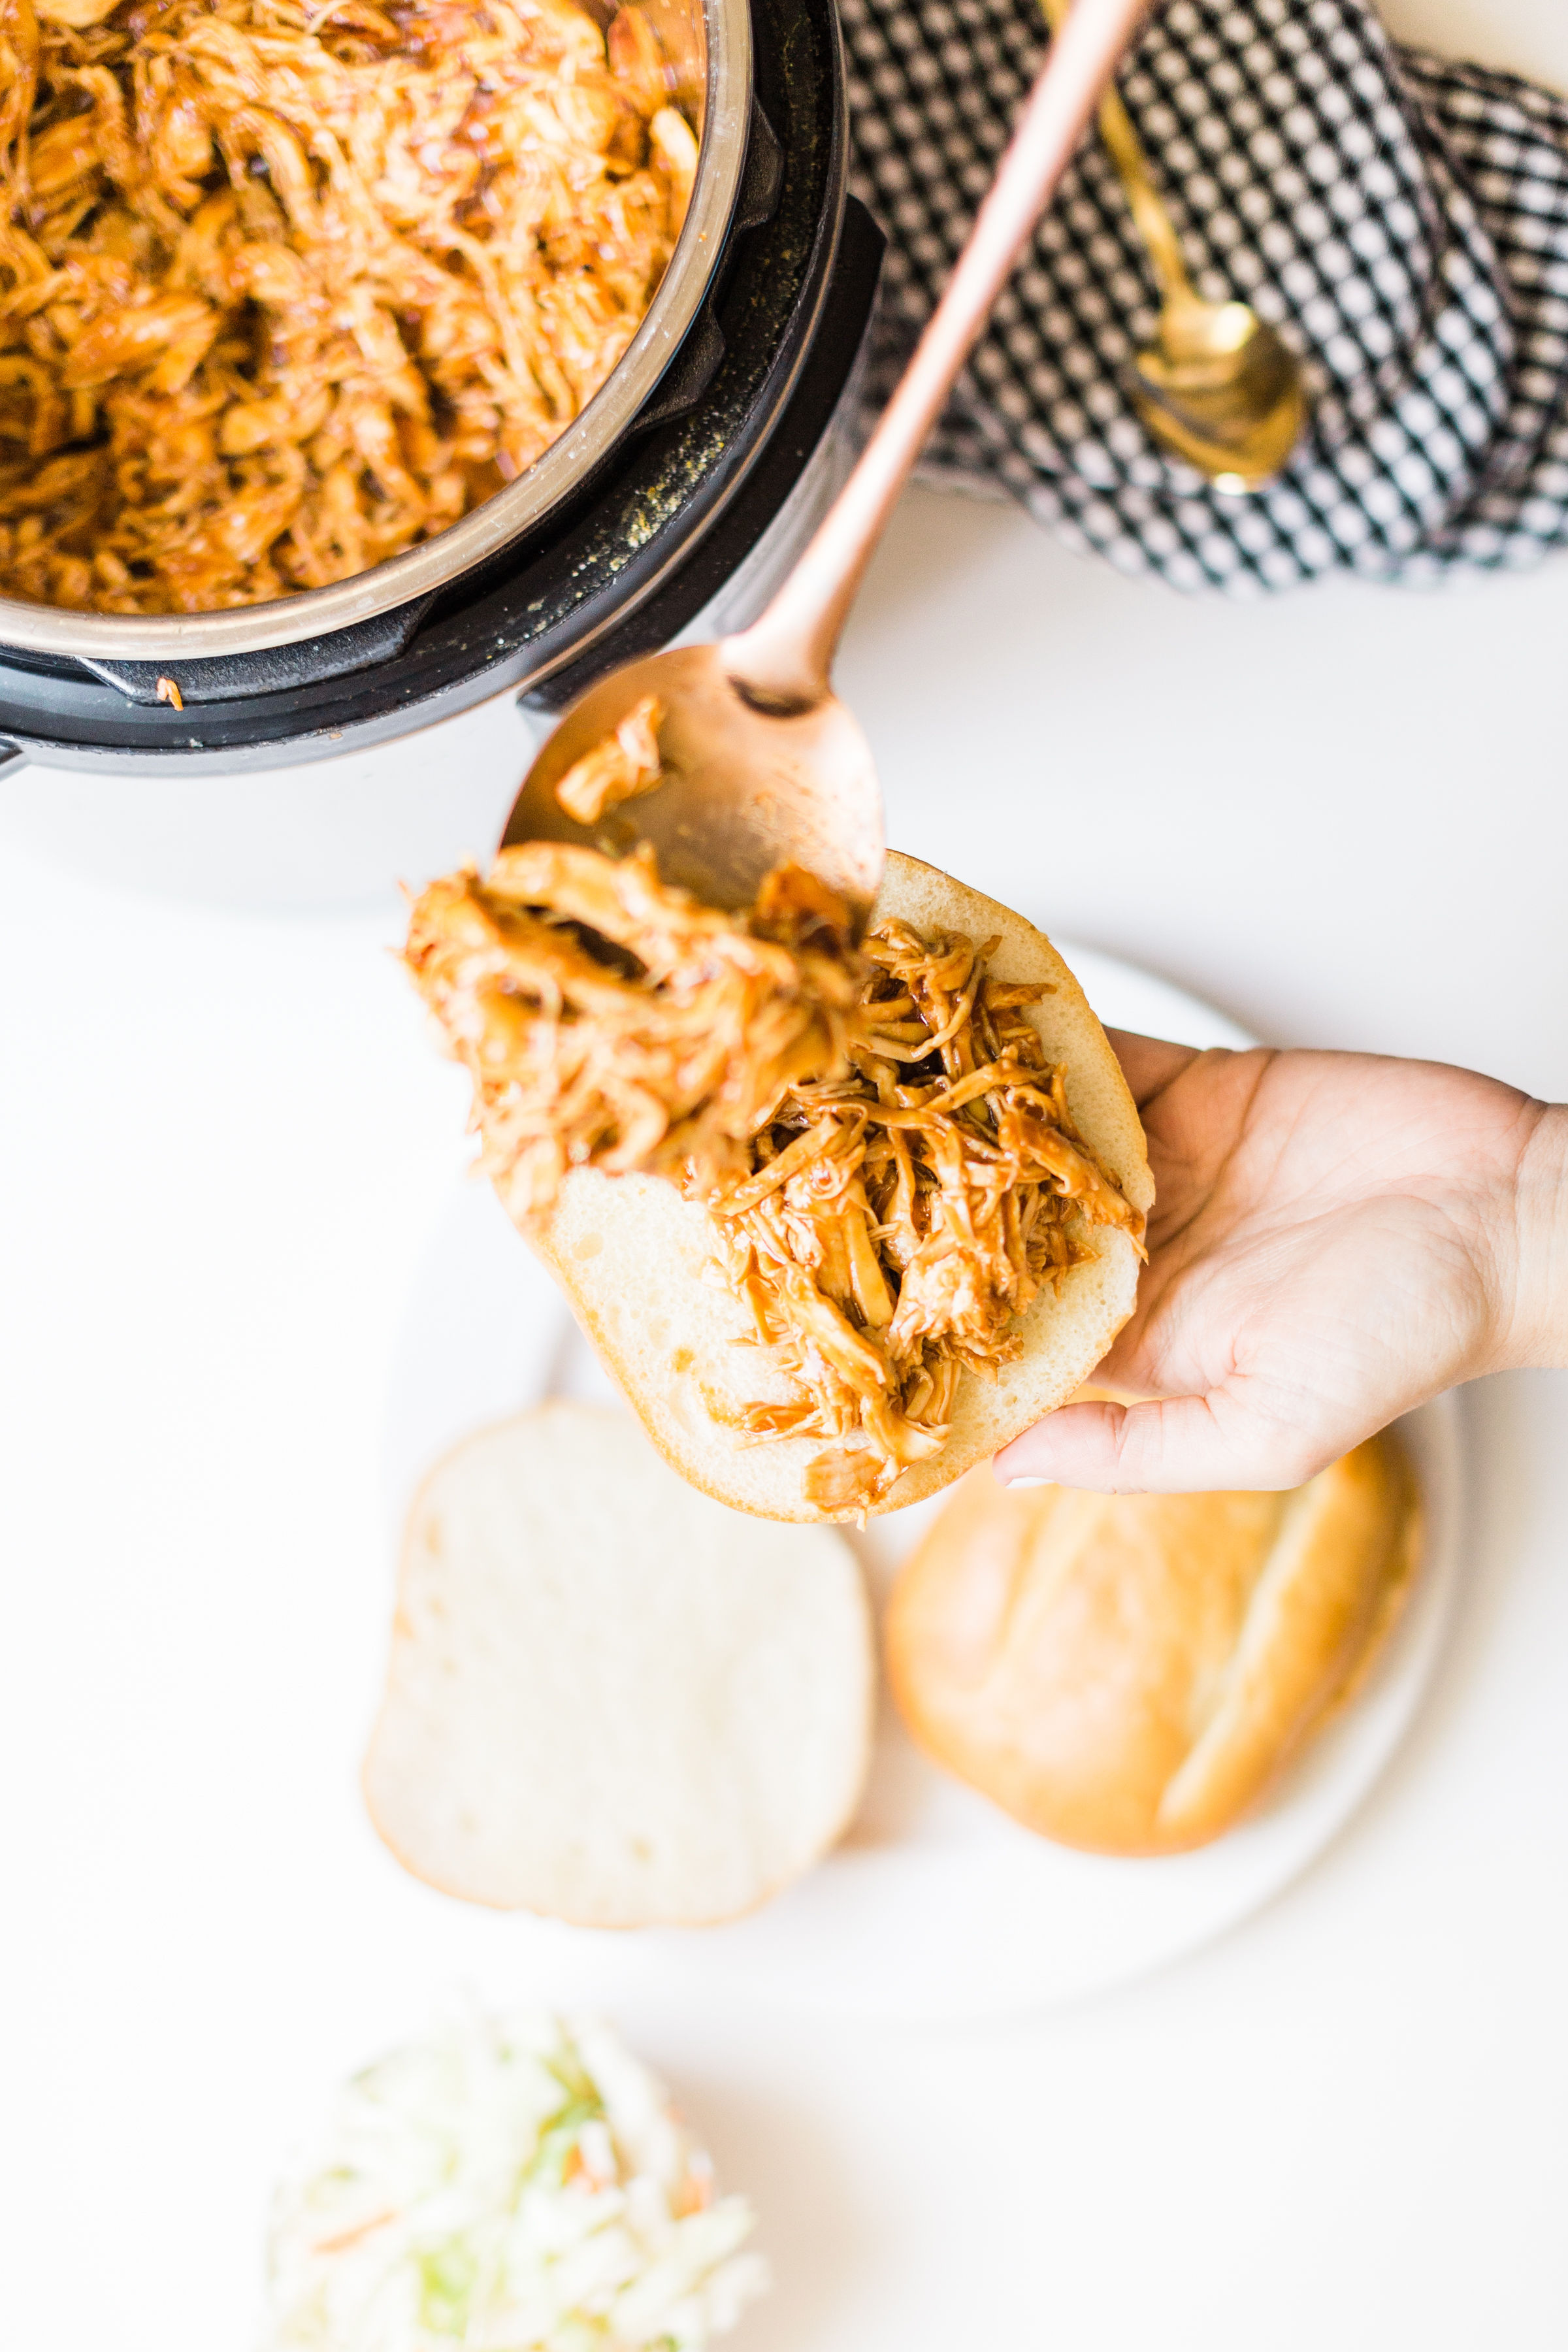 Skip the hot grill and make delicious barbecue pulled chicken in your slow cooker! Just throw a few ingredients right in the pot and let your crock pot or instant pot do the rest. Yum! Click through for the BBQ recipe. | glitterinc.com | @glitterinc